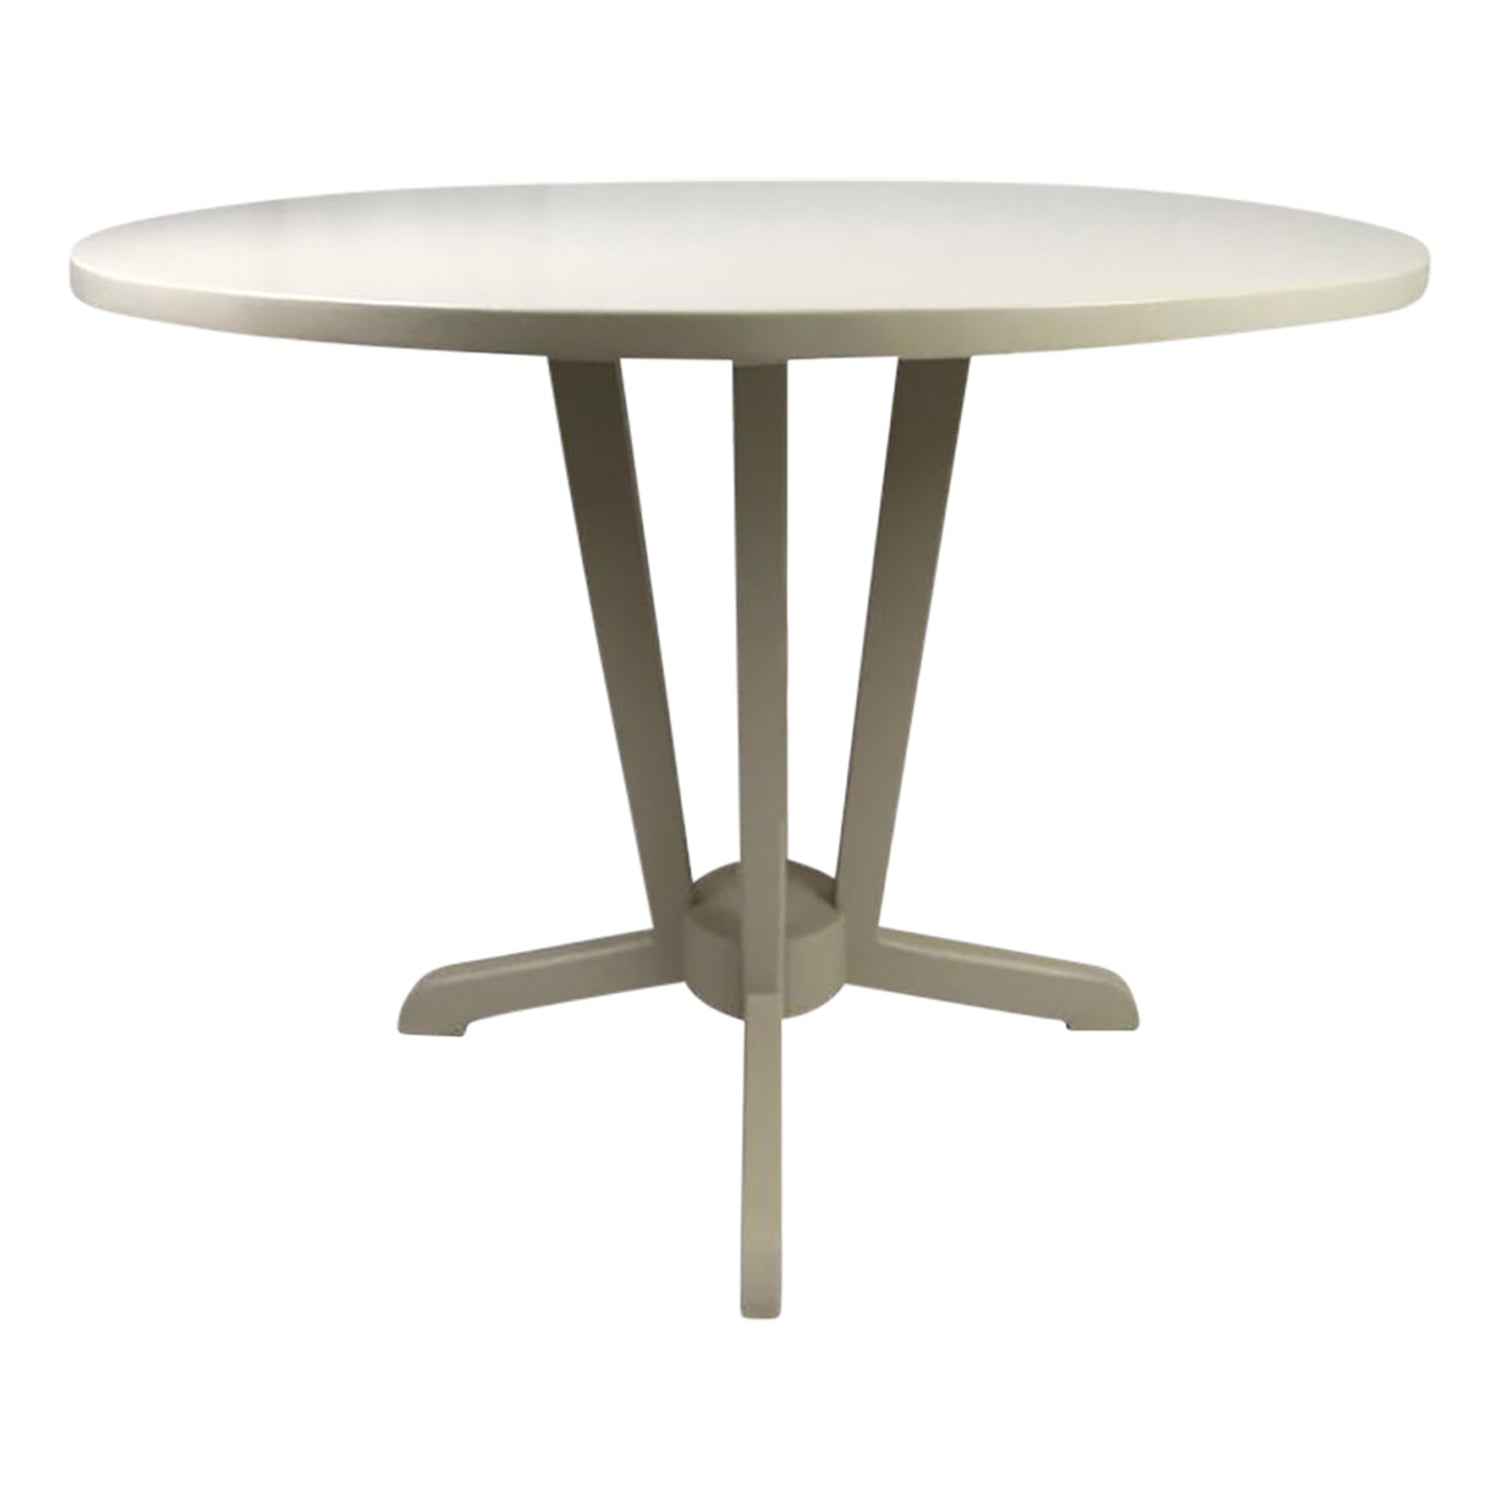 Wensum Pedestal Table - Taupe